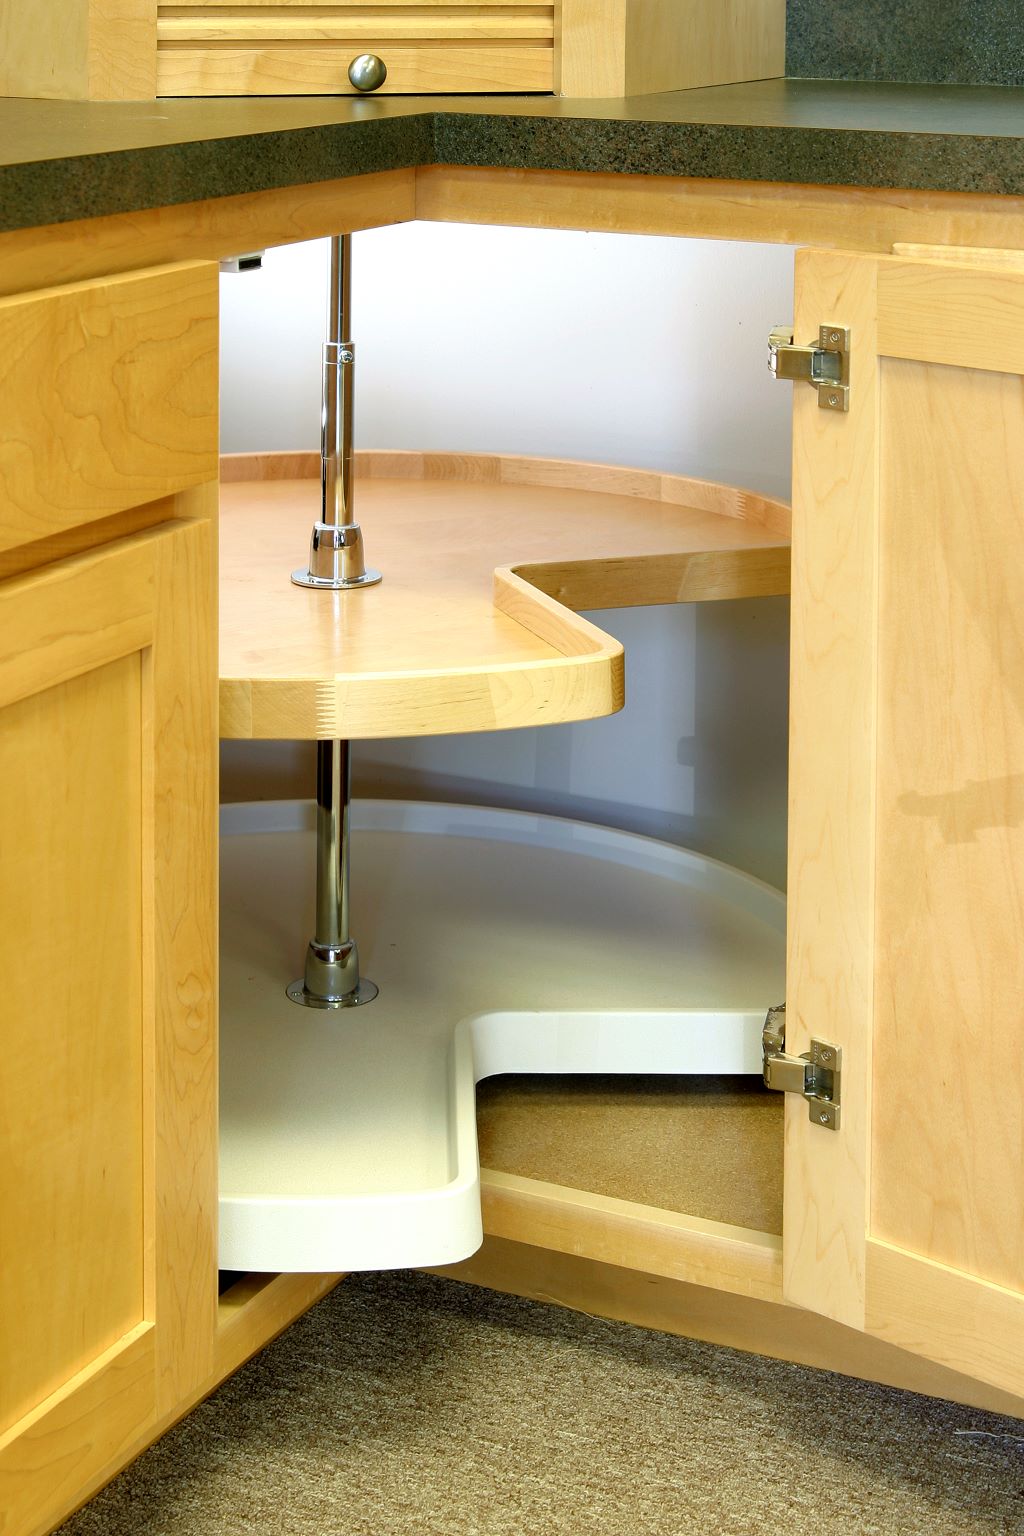 The Lazy Susan design is a popular option to consider when you want to replace your kitchen cabinets.